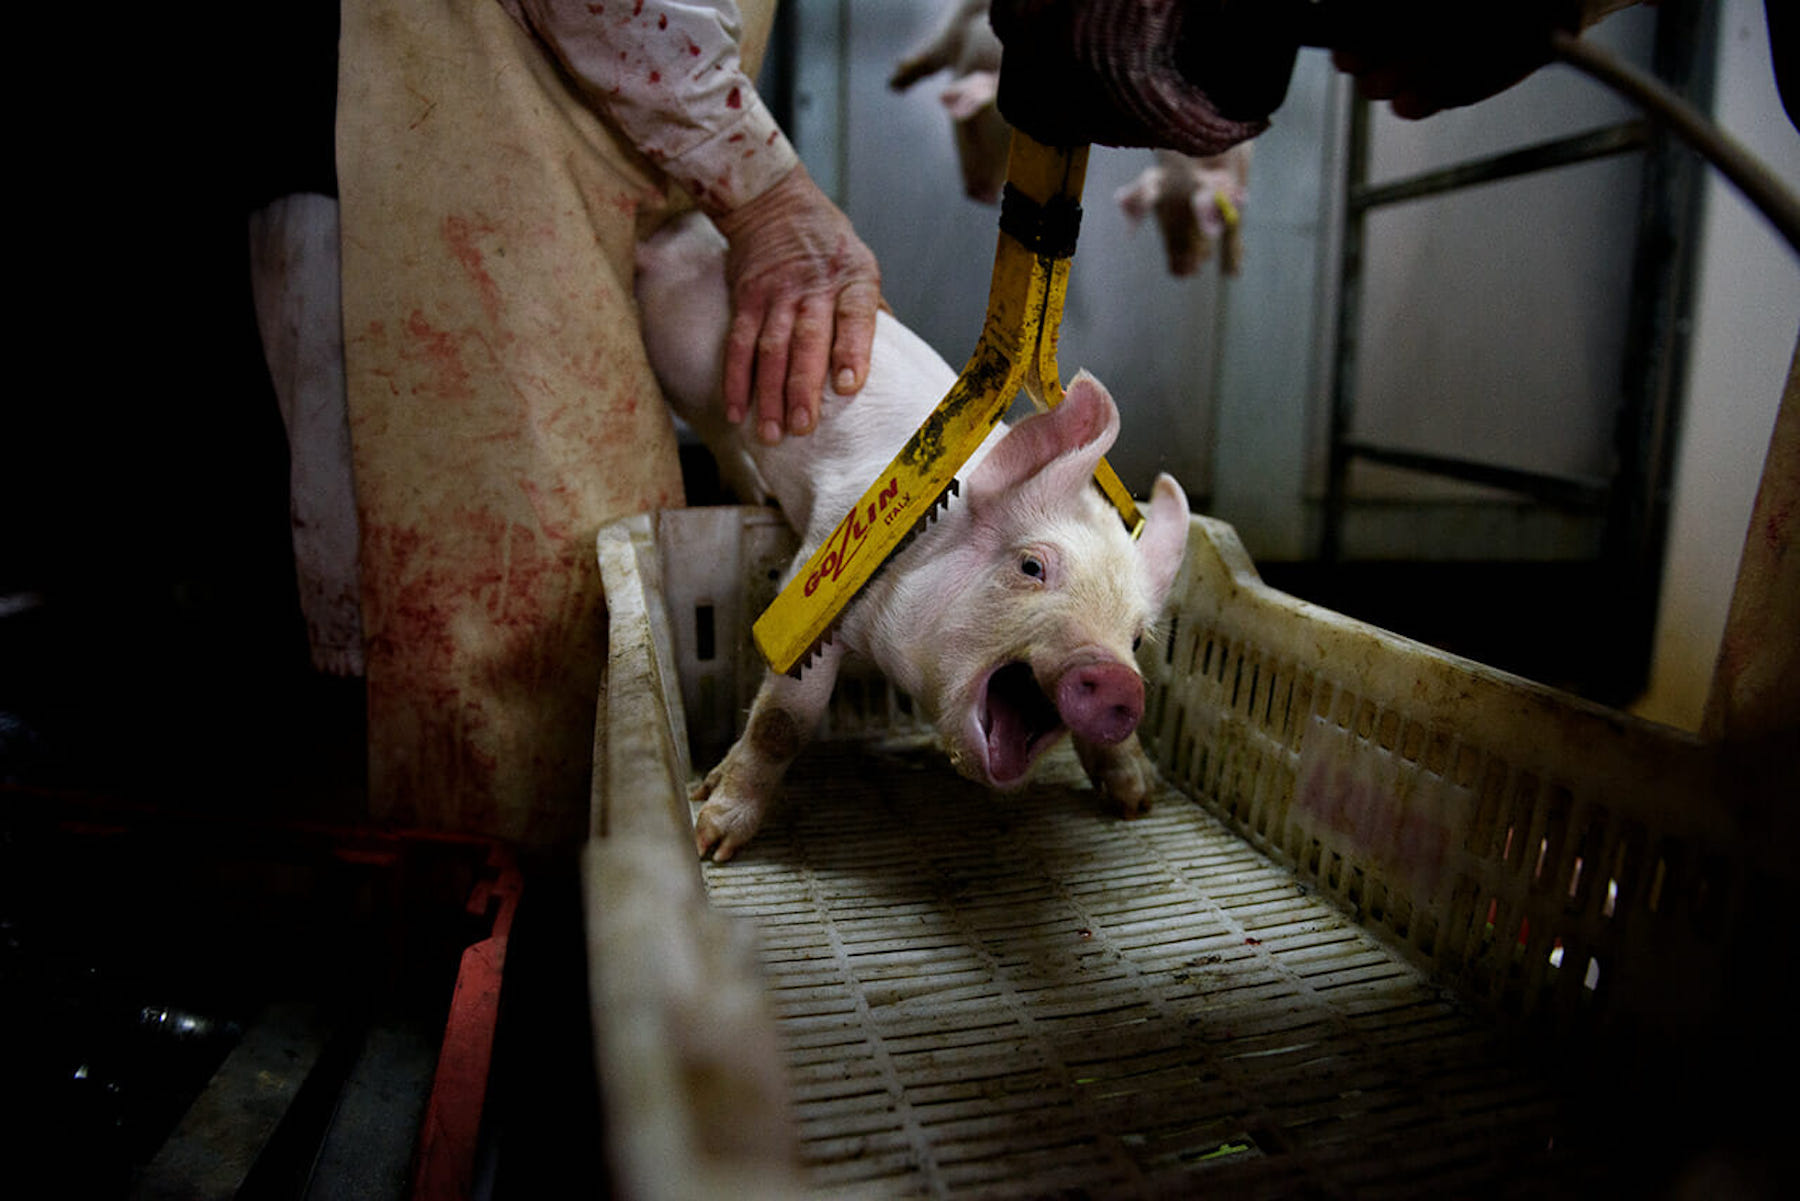 Pig being stunned in a slaughterhouse